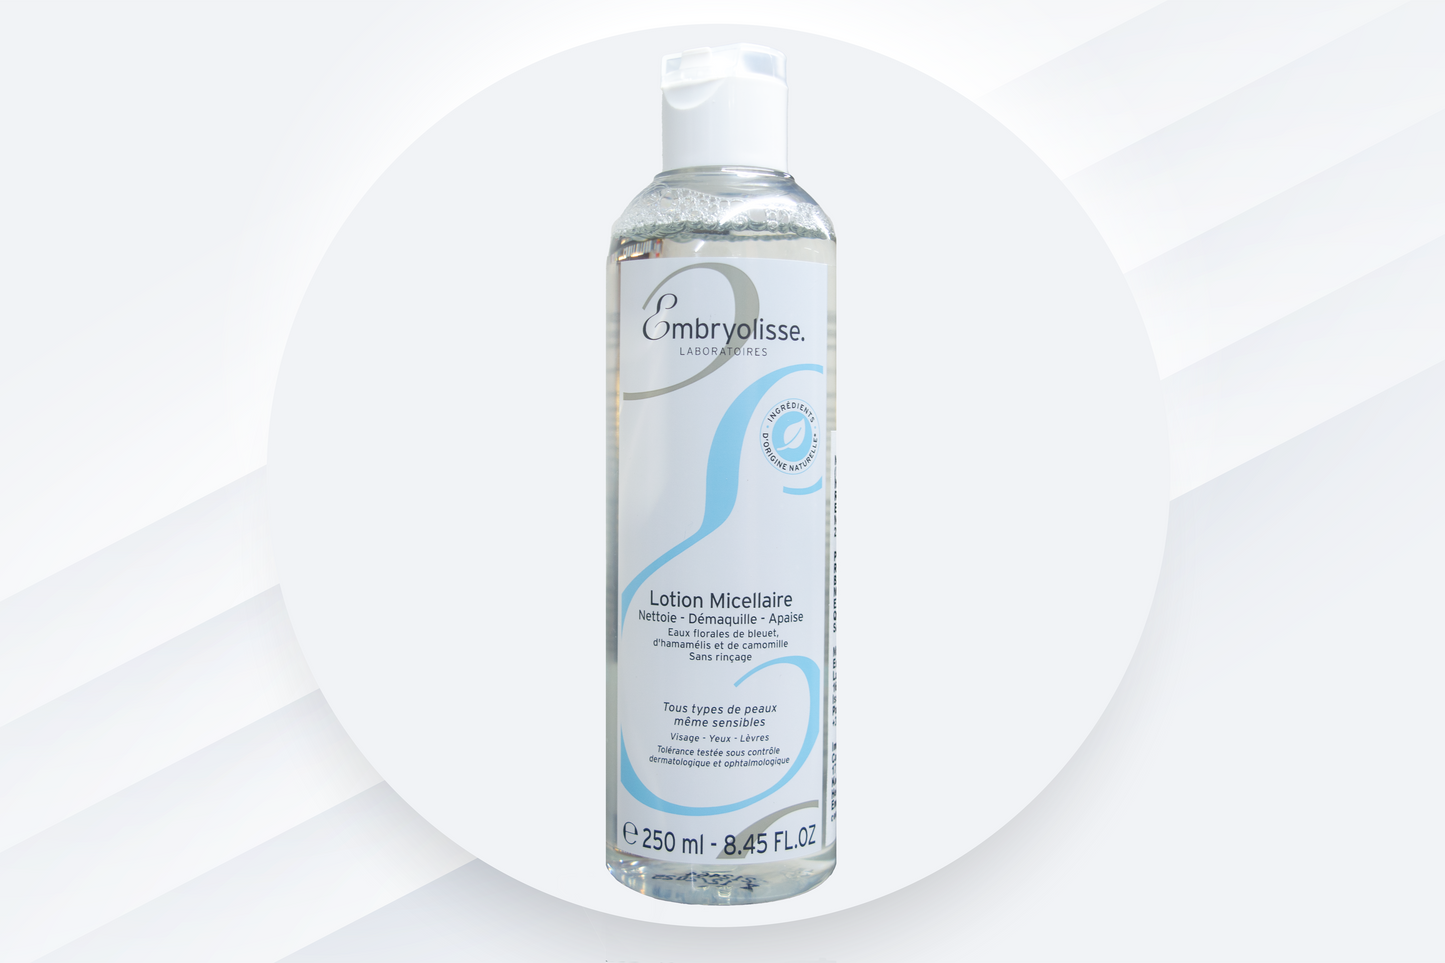 Embryolisse Micellar Lotion – Cleansing and Make-up Remover